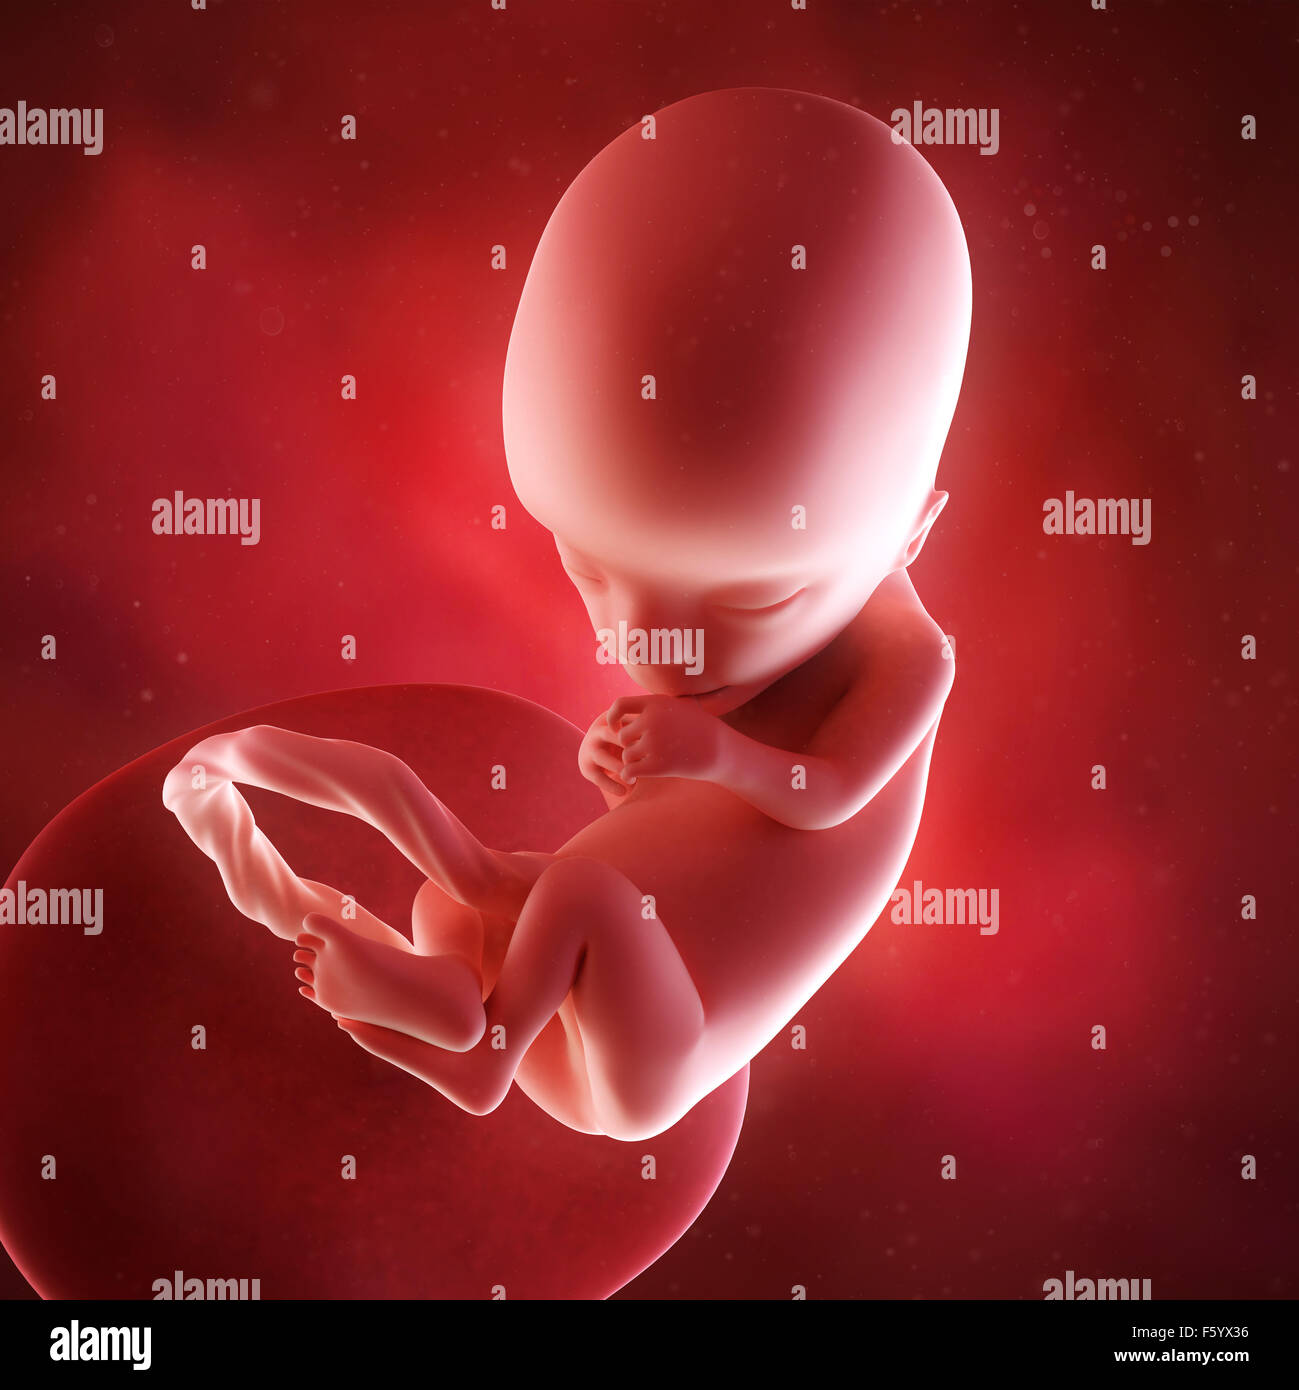 medical accurate 3d illustration of a fetus week 13 Stock Photo